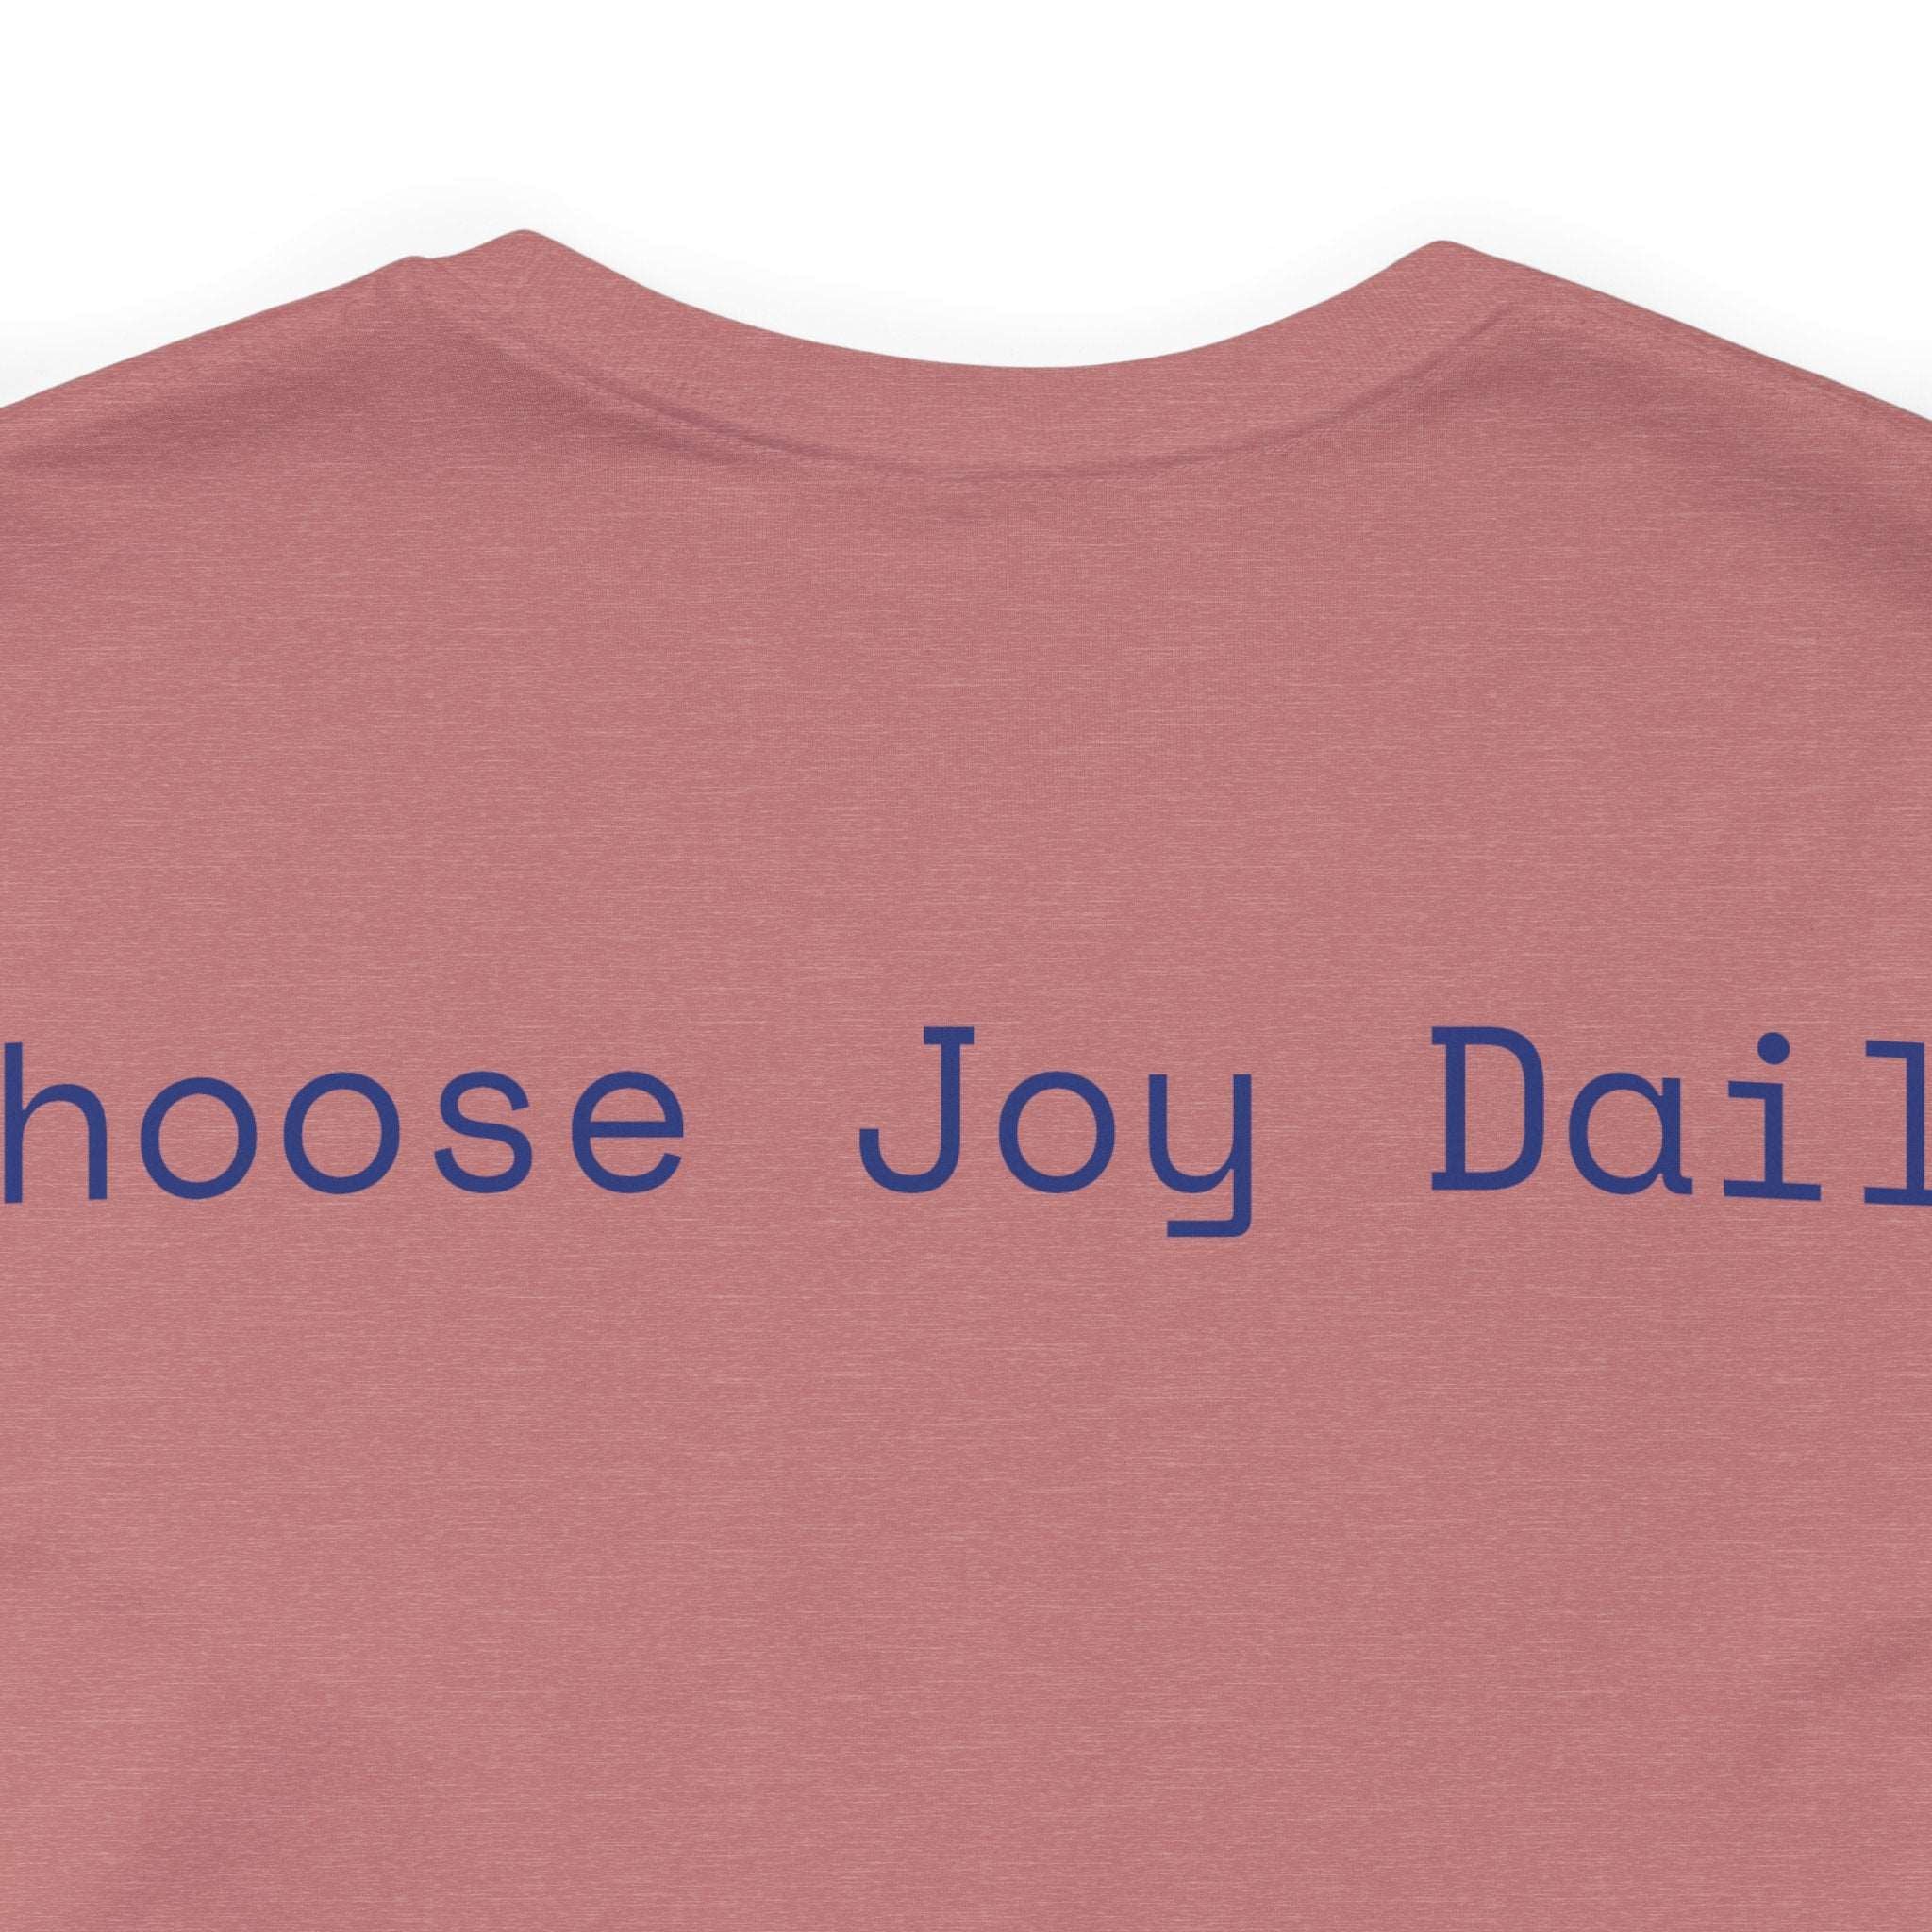 Choose Joy Daily Jersey Tee - Bella+Canvas 3001 Heather Mauve Airlume Cotton Bella+Canvas 3001 Crew Neckline Jersey Short Sleeve Lightweight Fabric Mental Health Support Retail Fit Tear-away Label Tee Unisex Tee T-Shirt 16279592162156439373_2048_7318a329-3d52-4377-865f-db93c06bf71e Printify